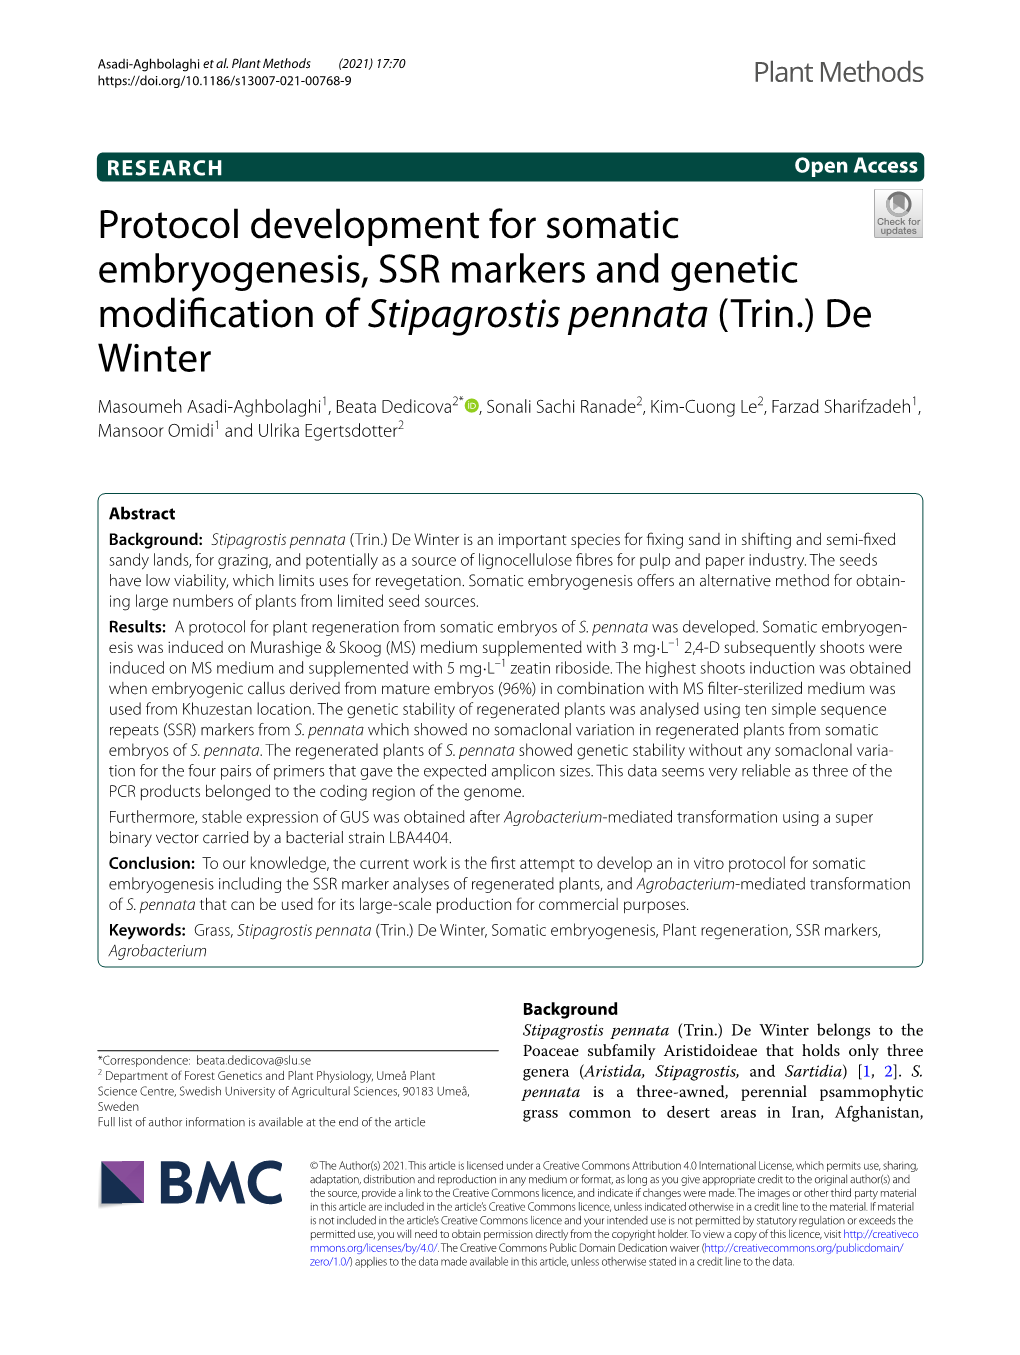 Protocol Development for Somatic Embryogenesis, SSR Markers And